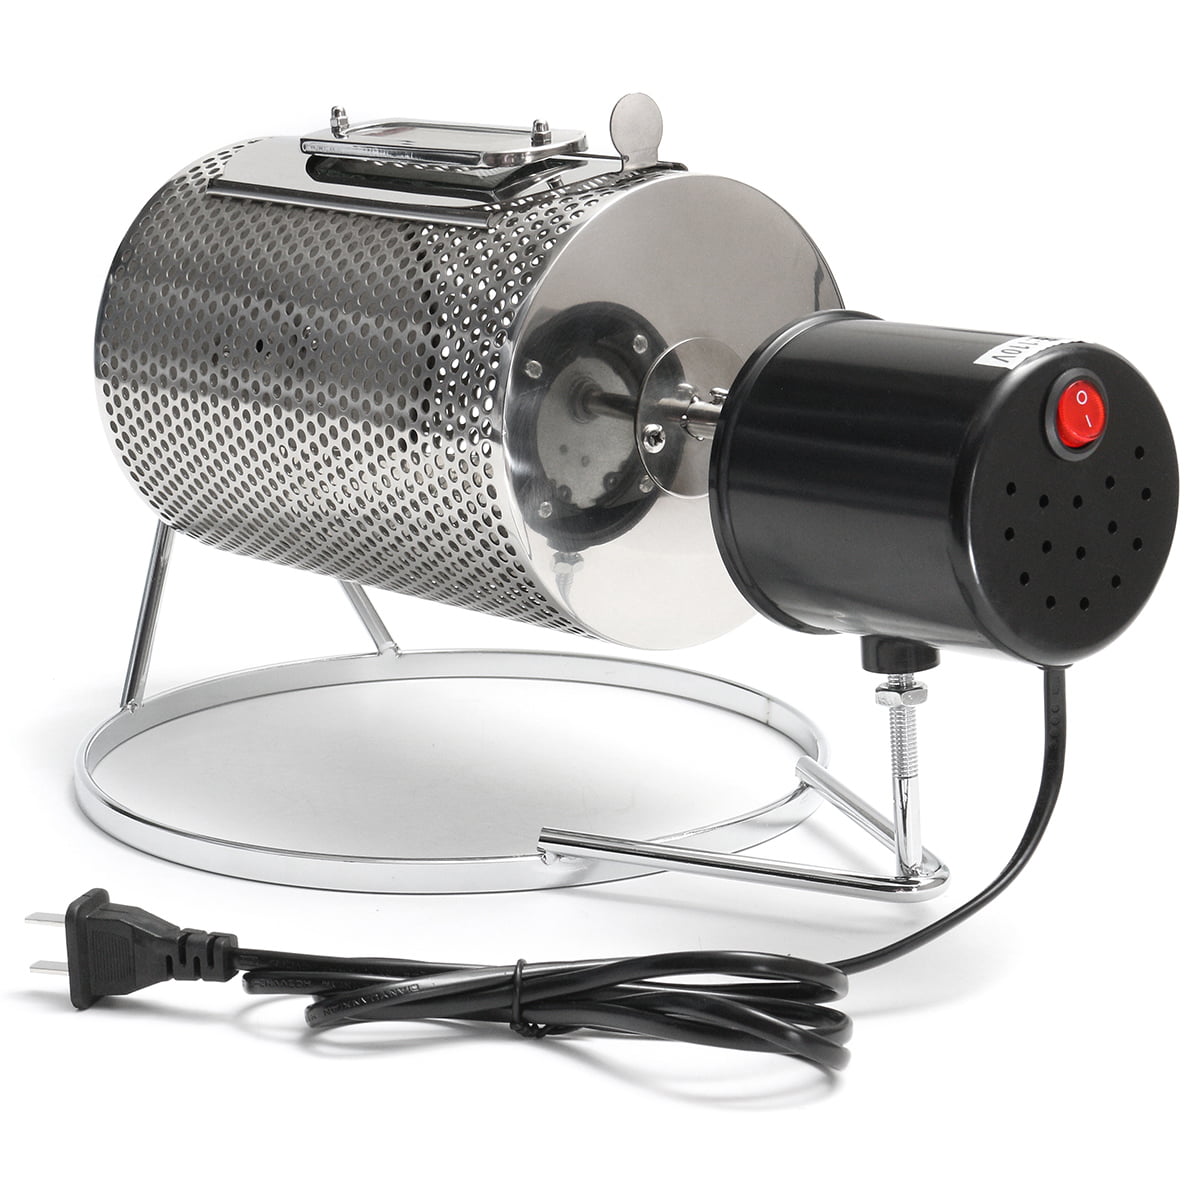 KALDI MINI Coffee Bean Roaster with Moter & Hand Operated for Home Stainless 